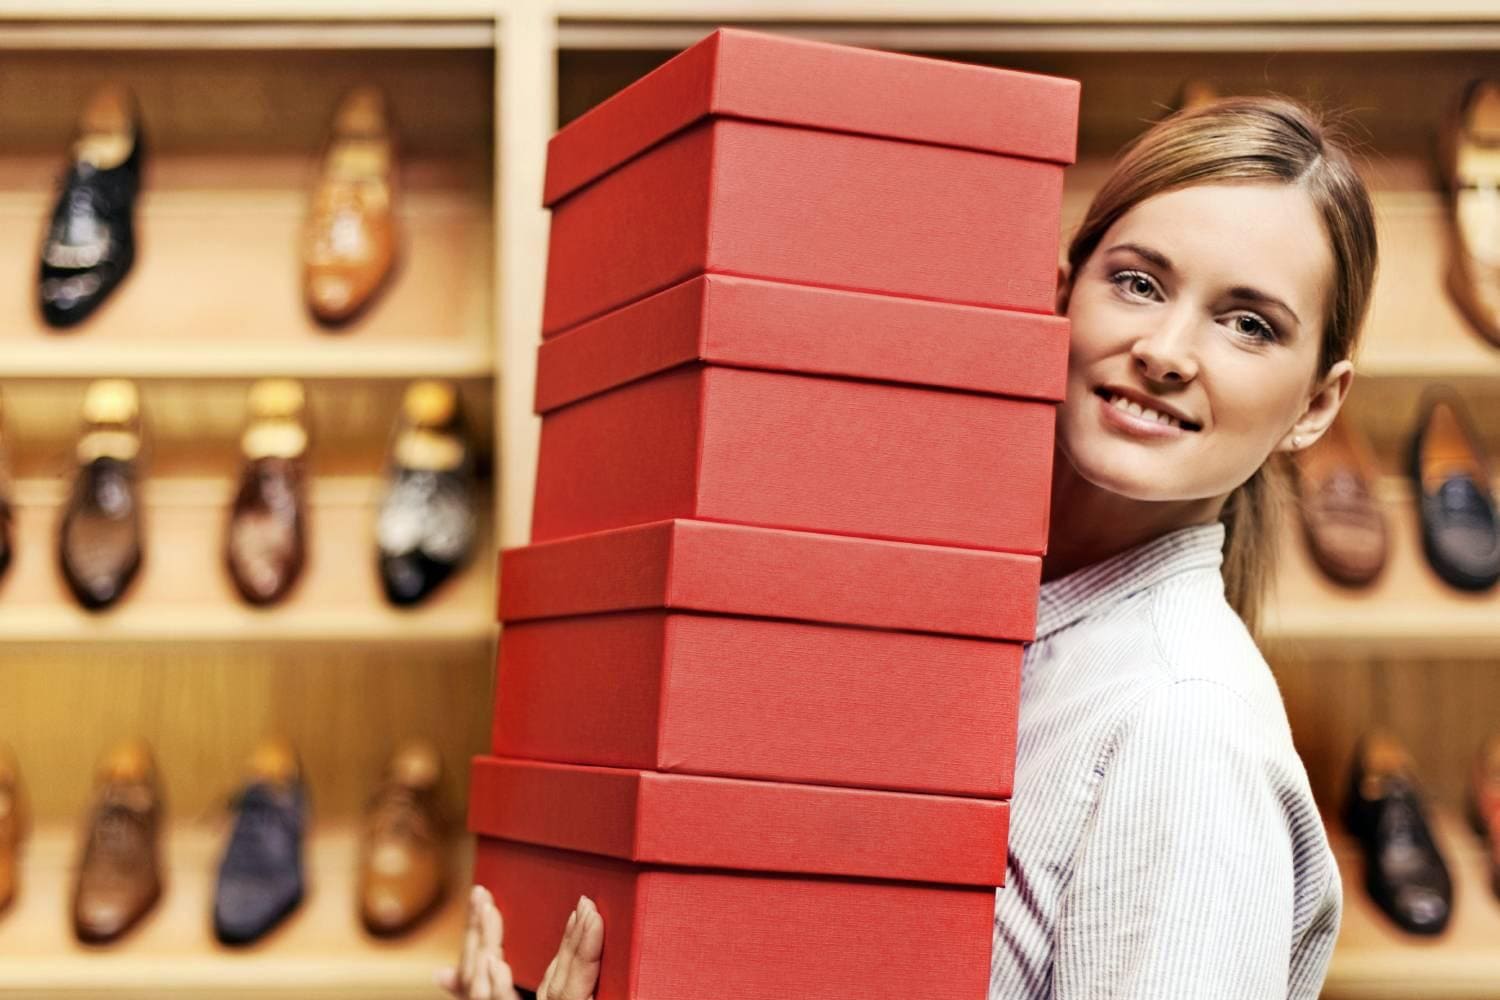 Woman in shoe store holding shoe boxes